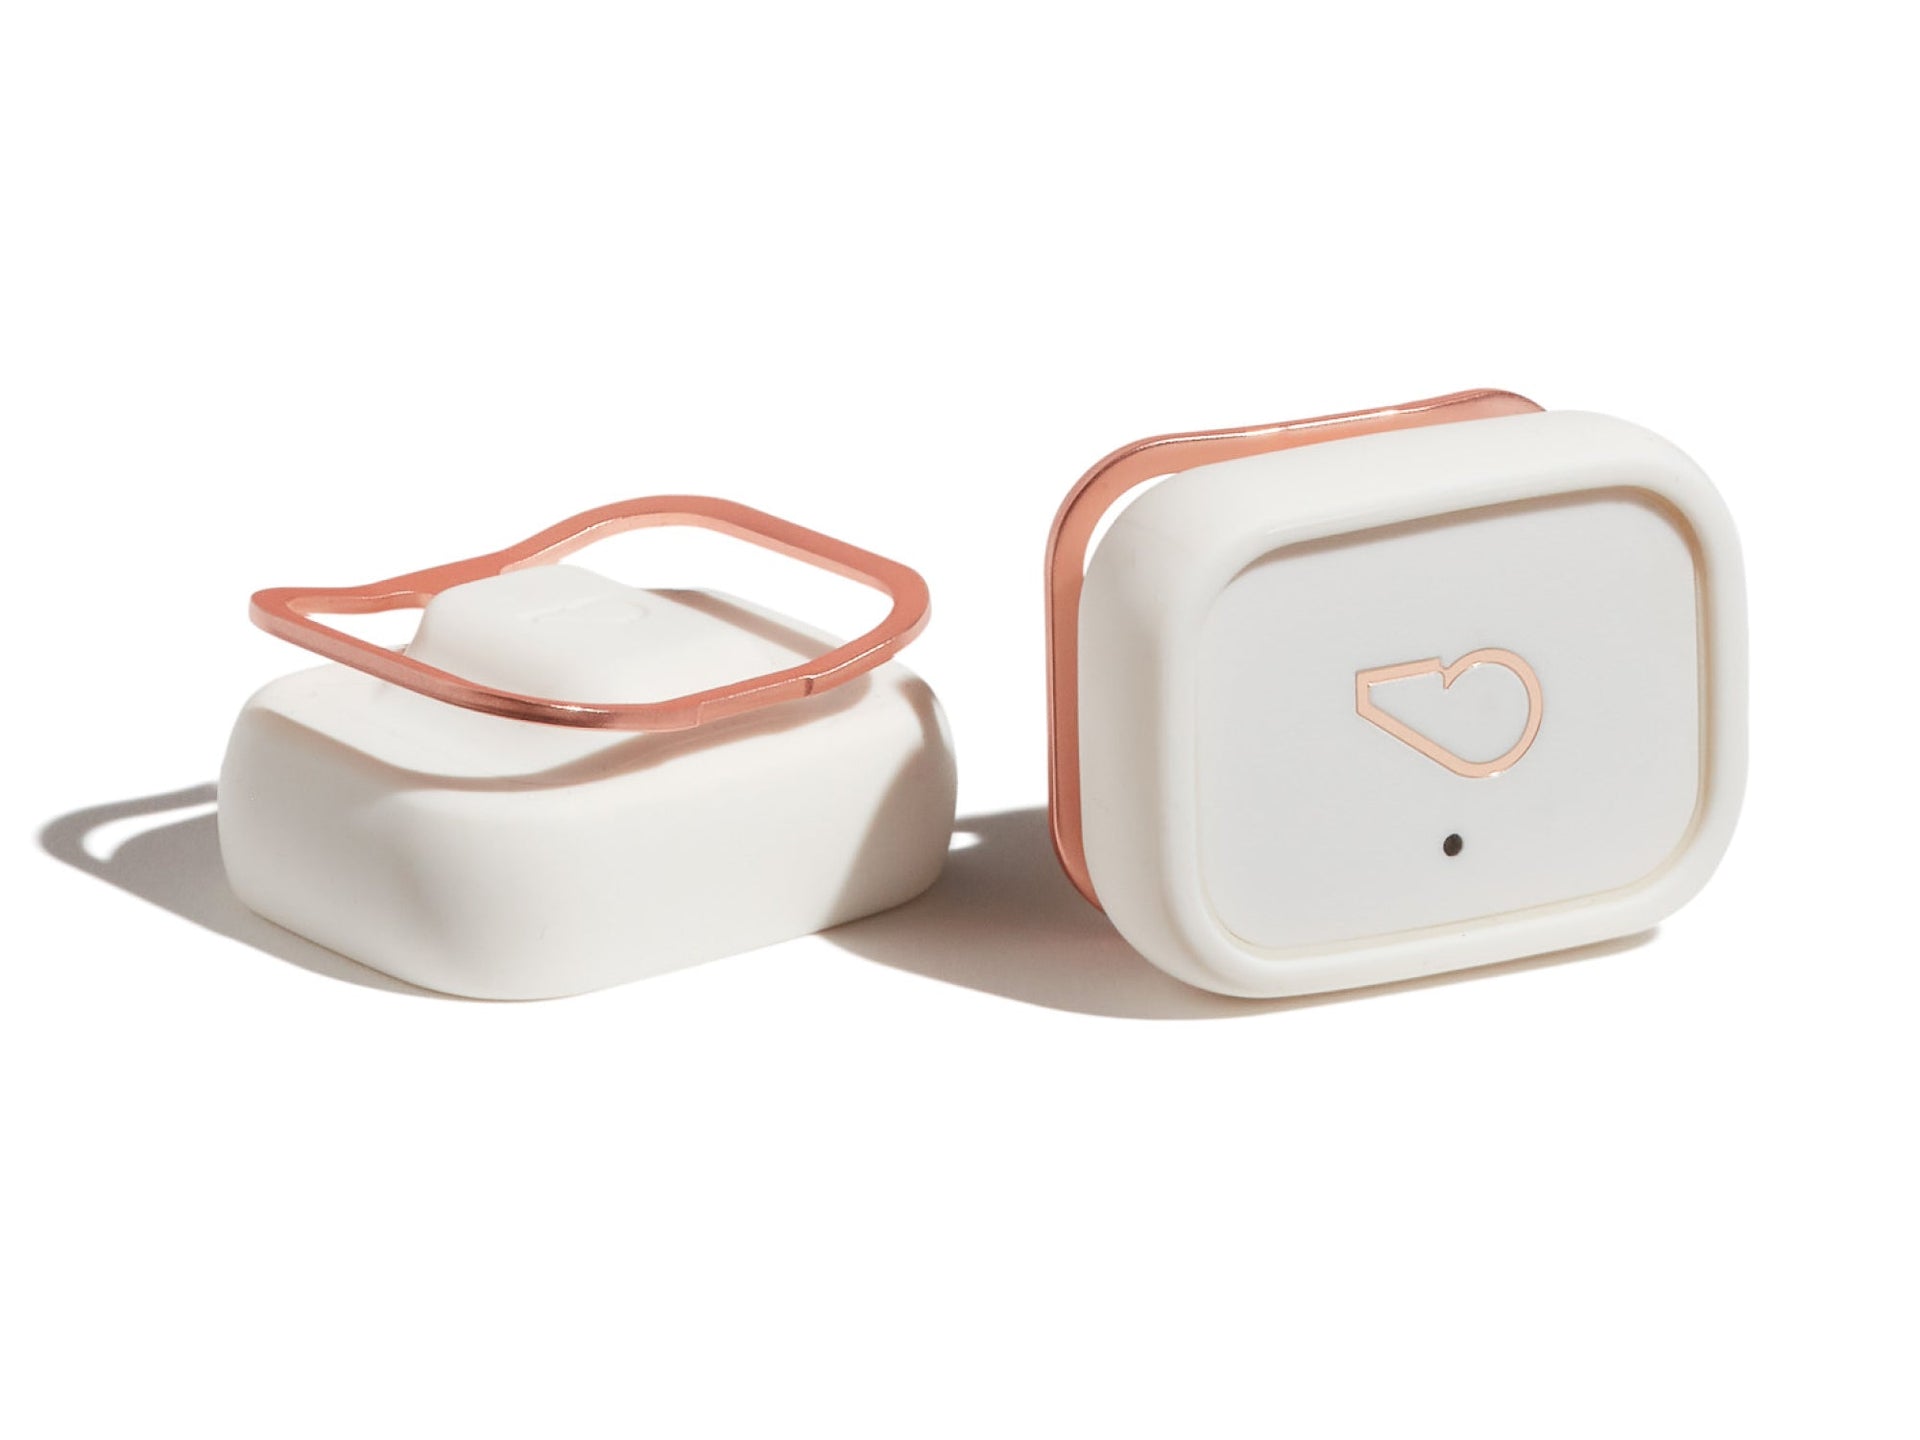 Whistle Health 2.0 Smart Device - White and Rose Gold